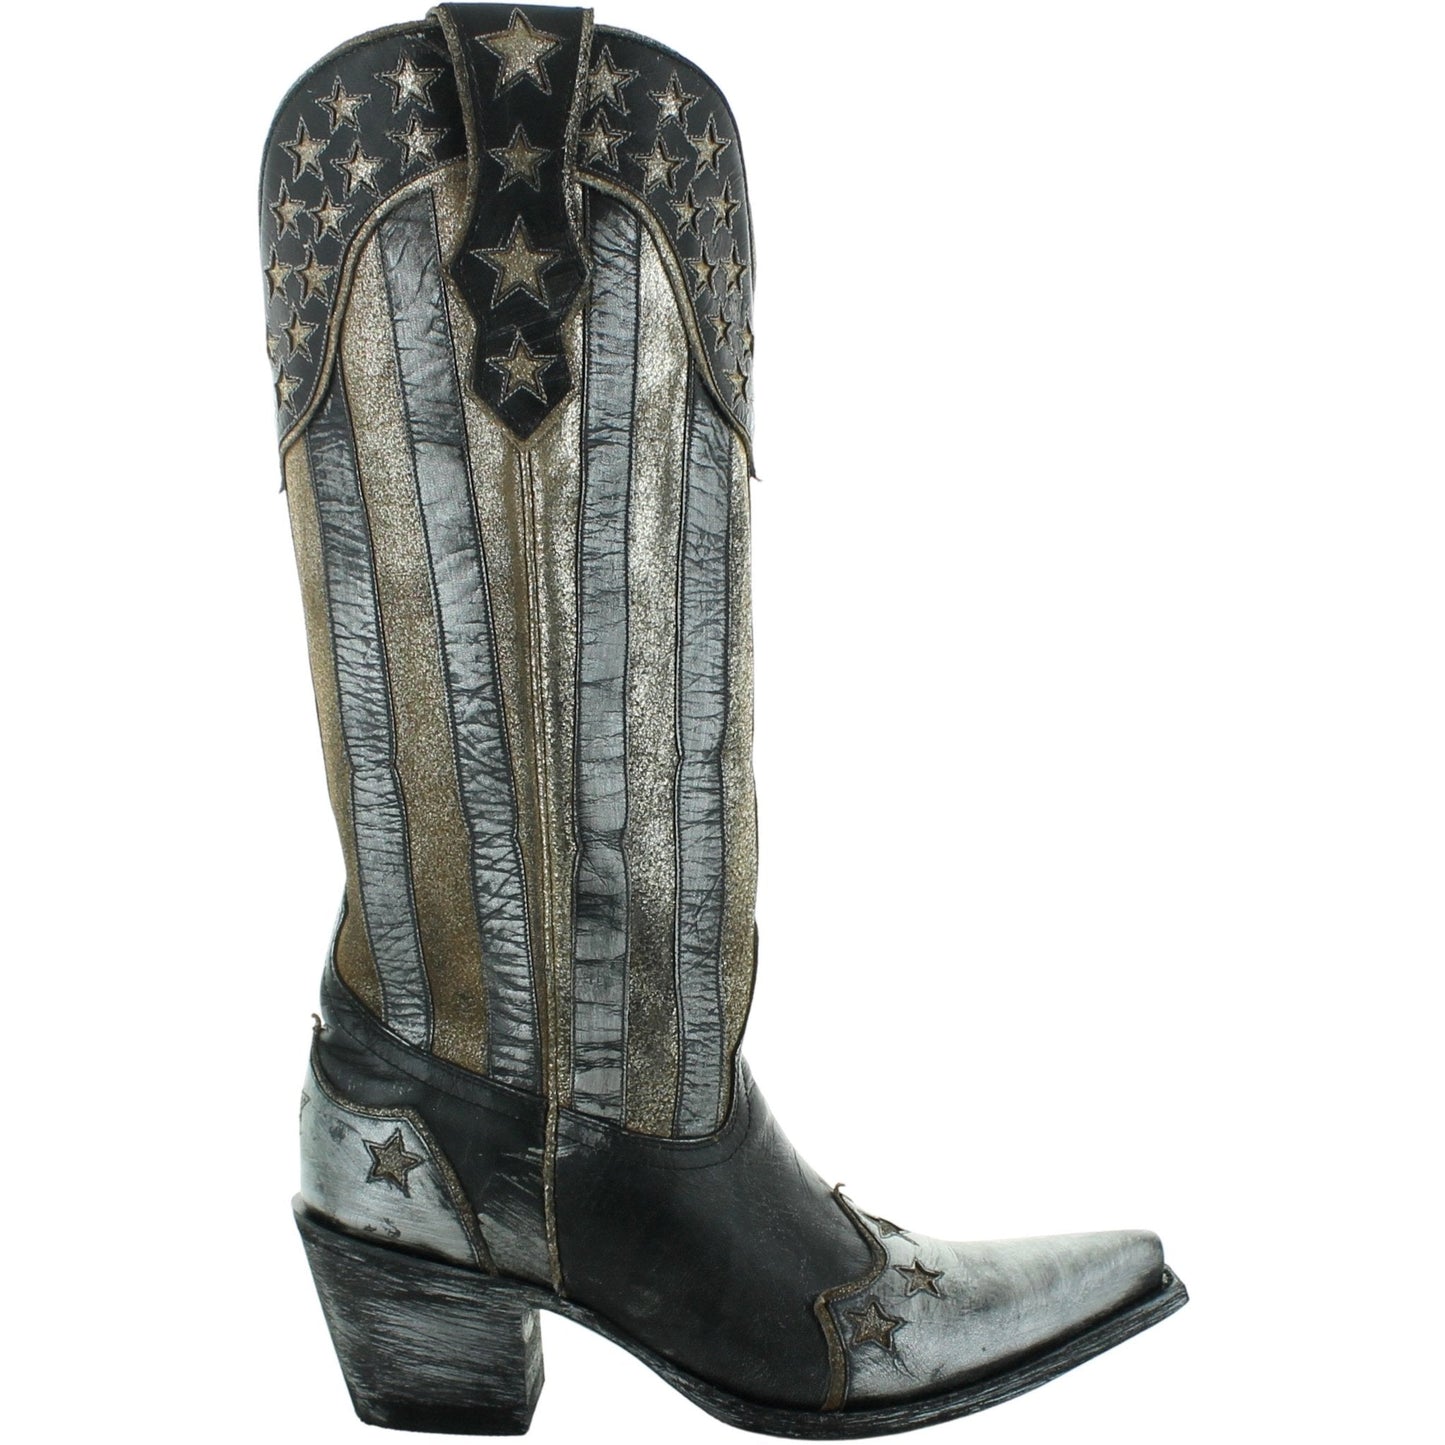 Yippee Ki Yay by Old Gringo Ladies Bloom Stars & Stripes Boots YL470-1